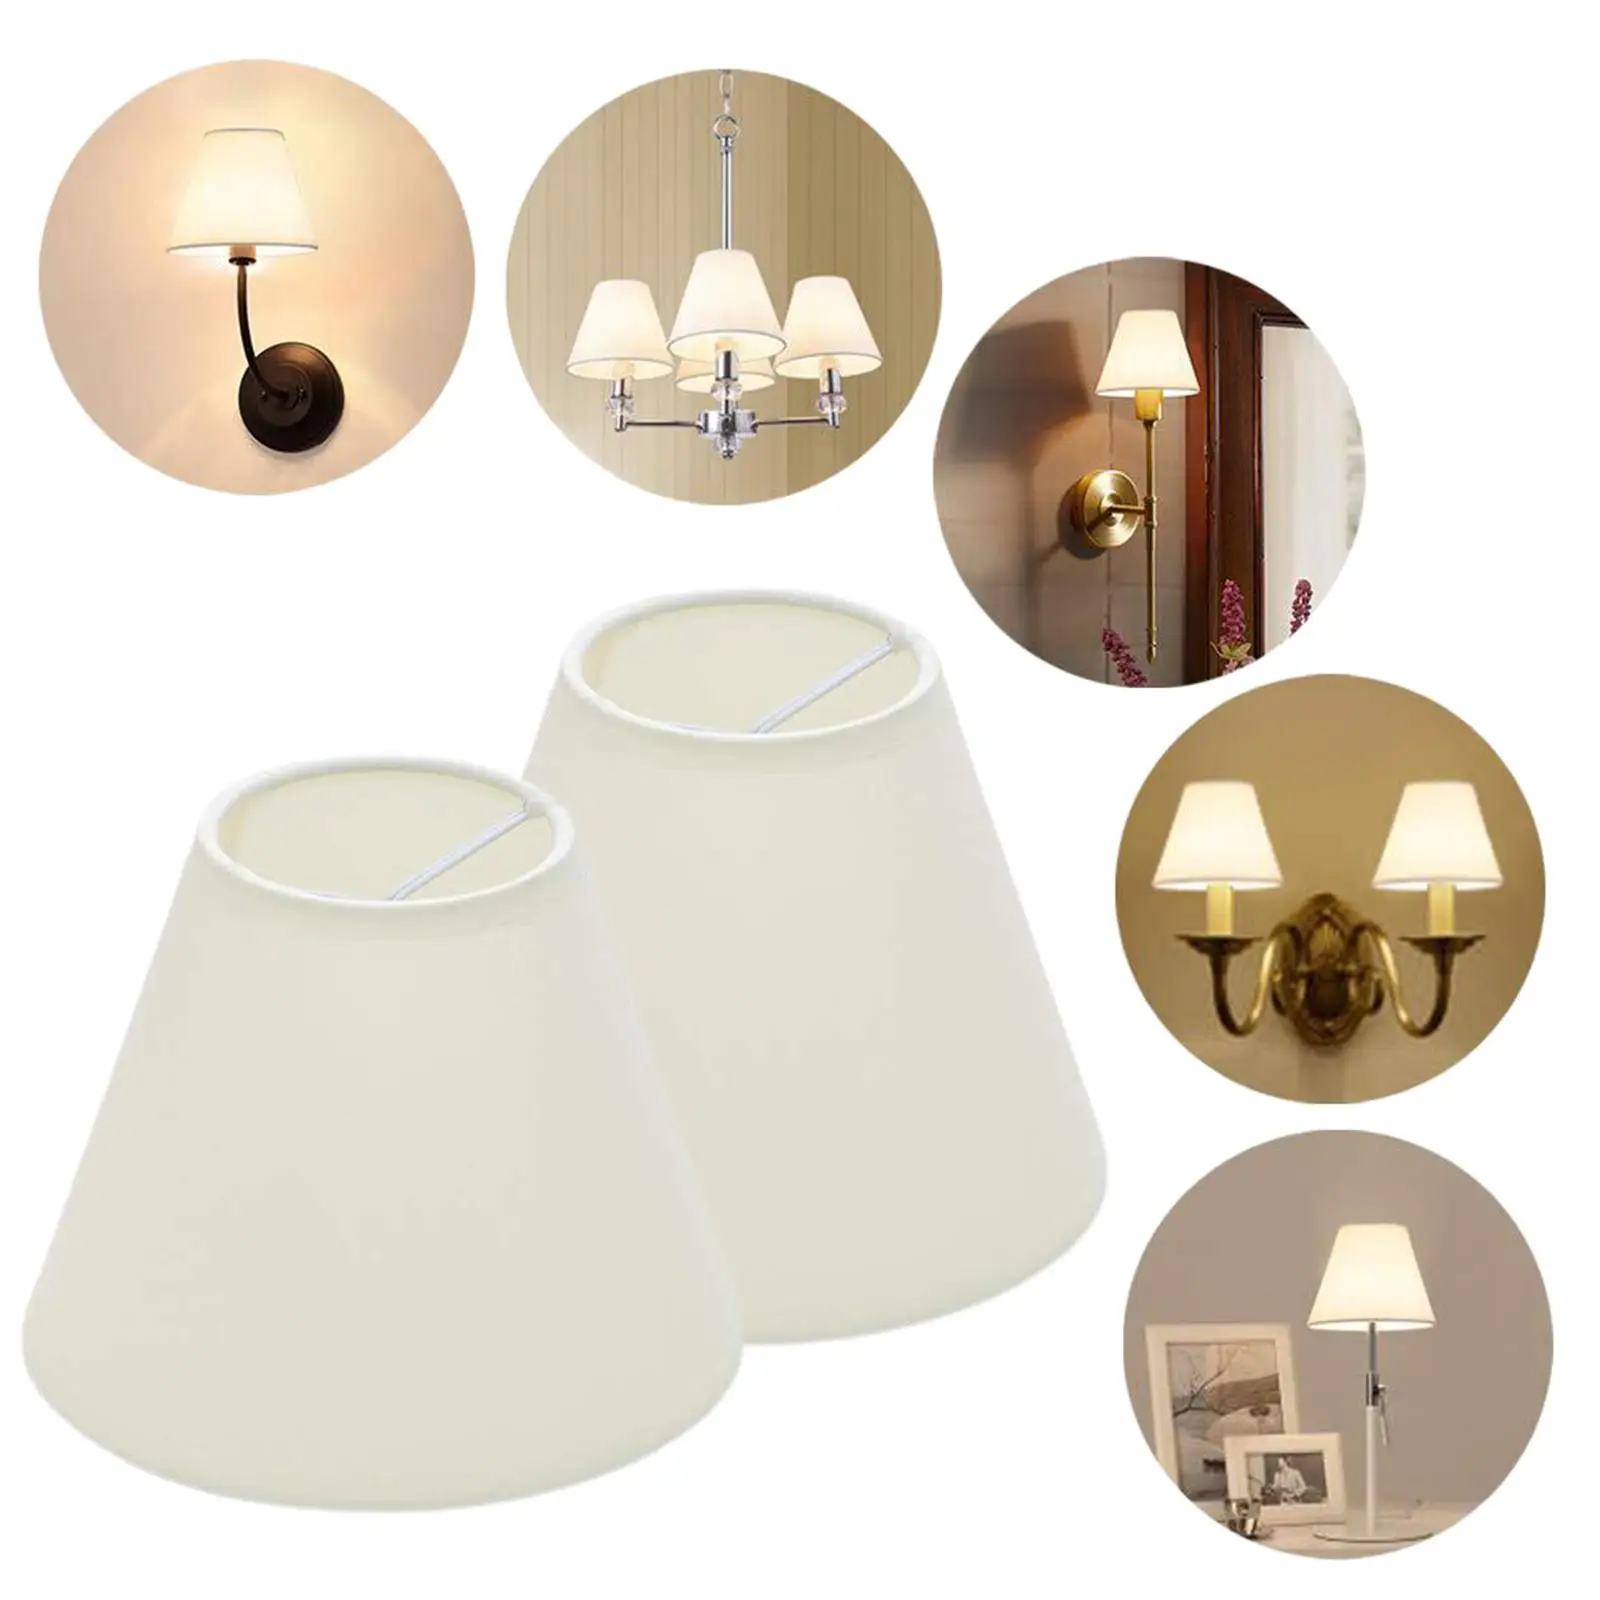 2Pcs Rustic Lamp Shade Lamp Cover Cloth Clip On Decorative Lampshade for Livingroom Accessories Hanging Light Bedroom